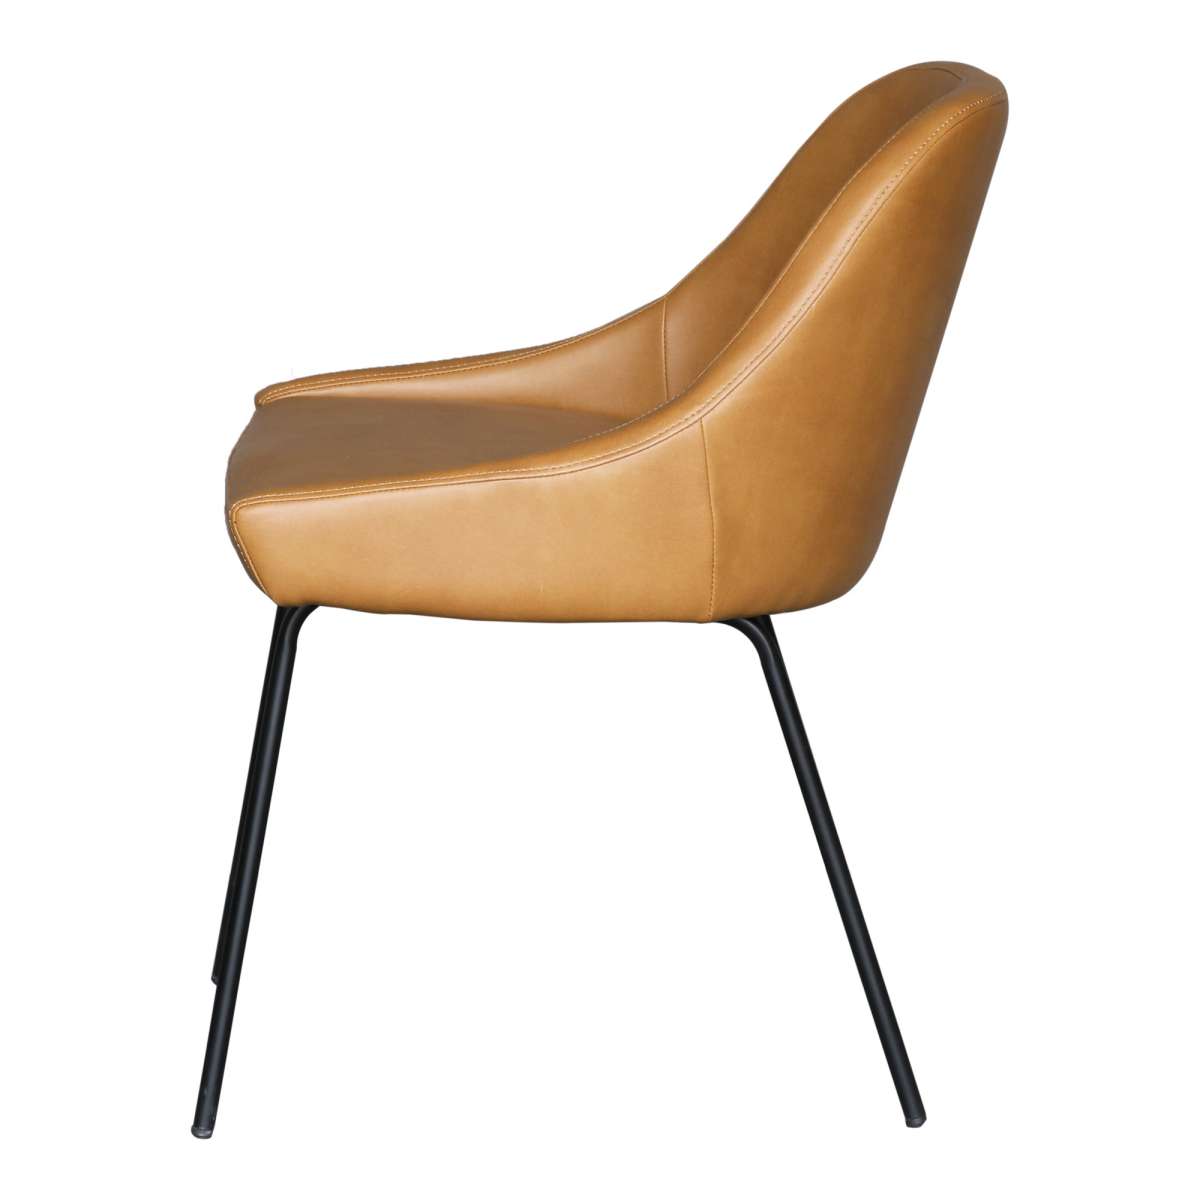 Blaze Dining Chair Tan By Moe's Home Collection